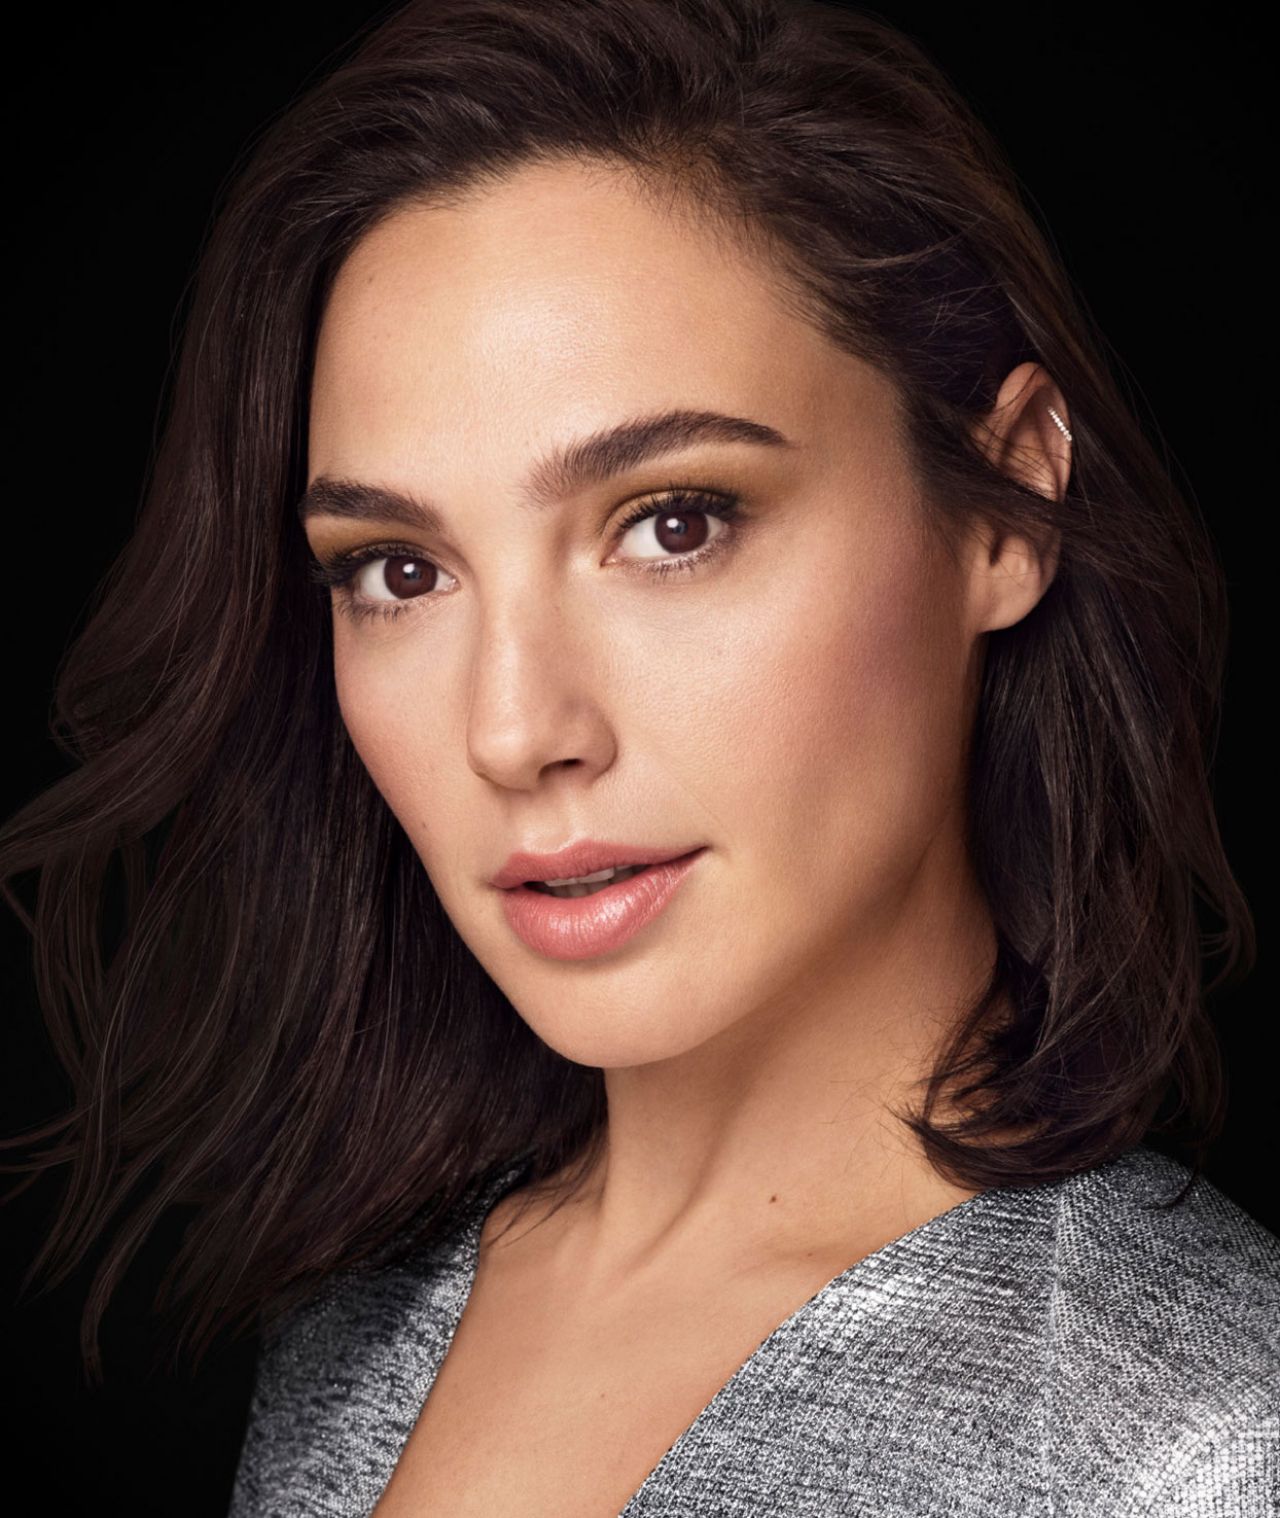 Gal Gadot - Photoshoot for Revlon "Live Boldly" Campaign.